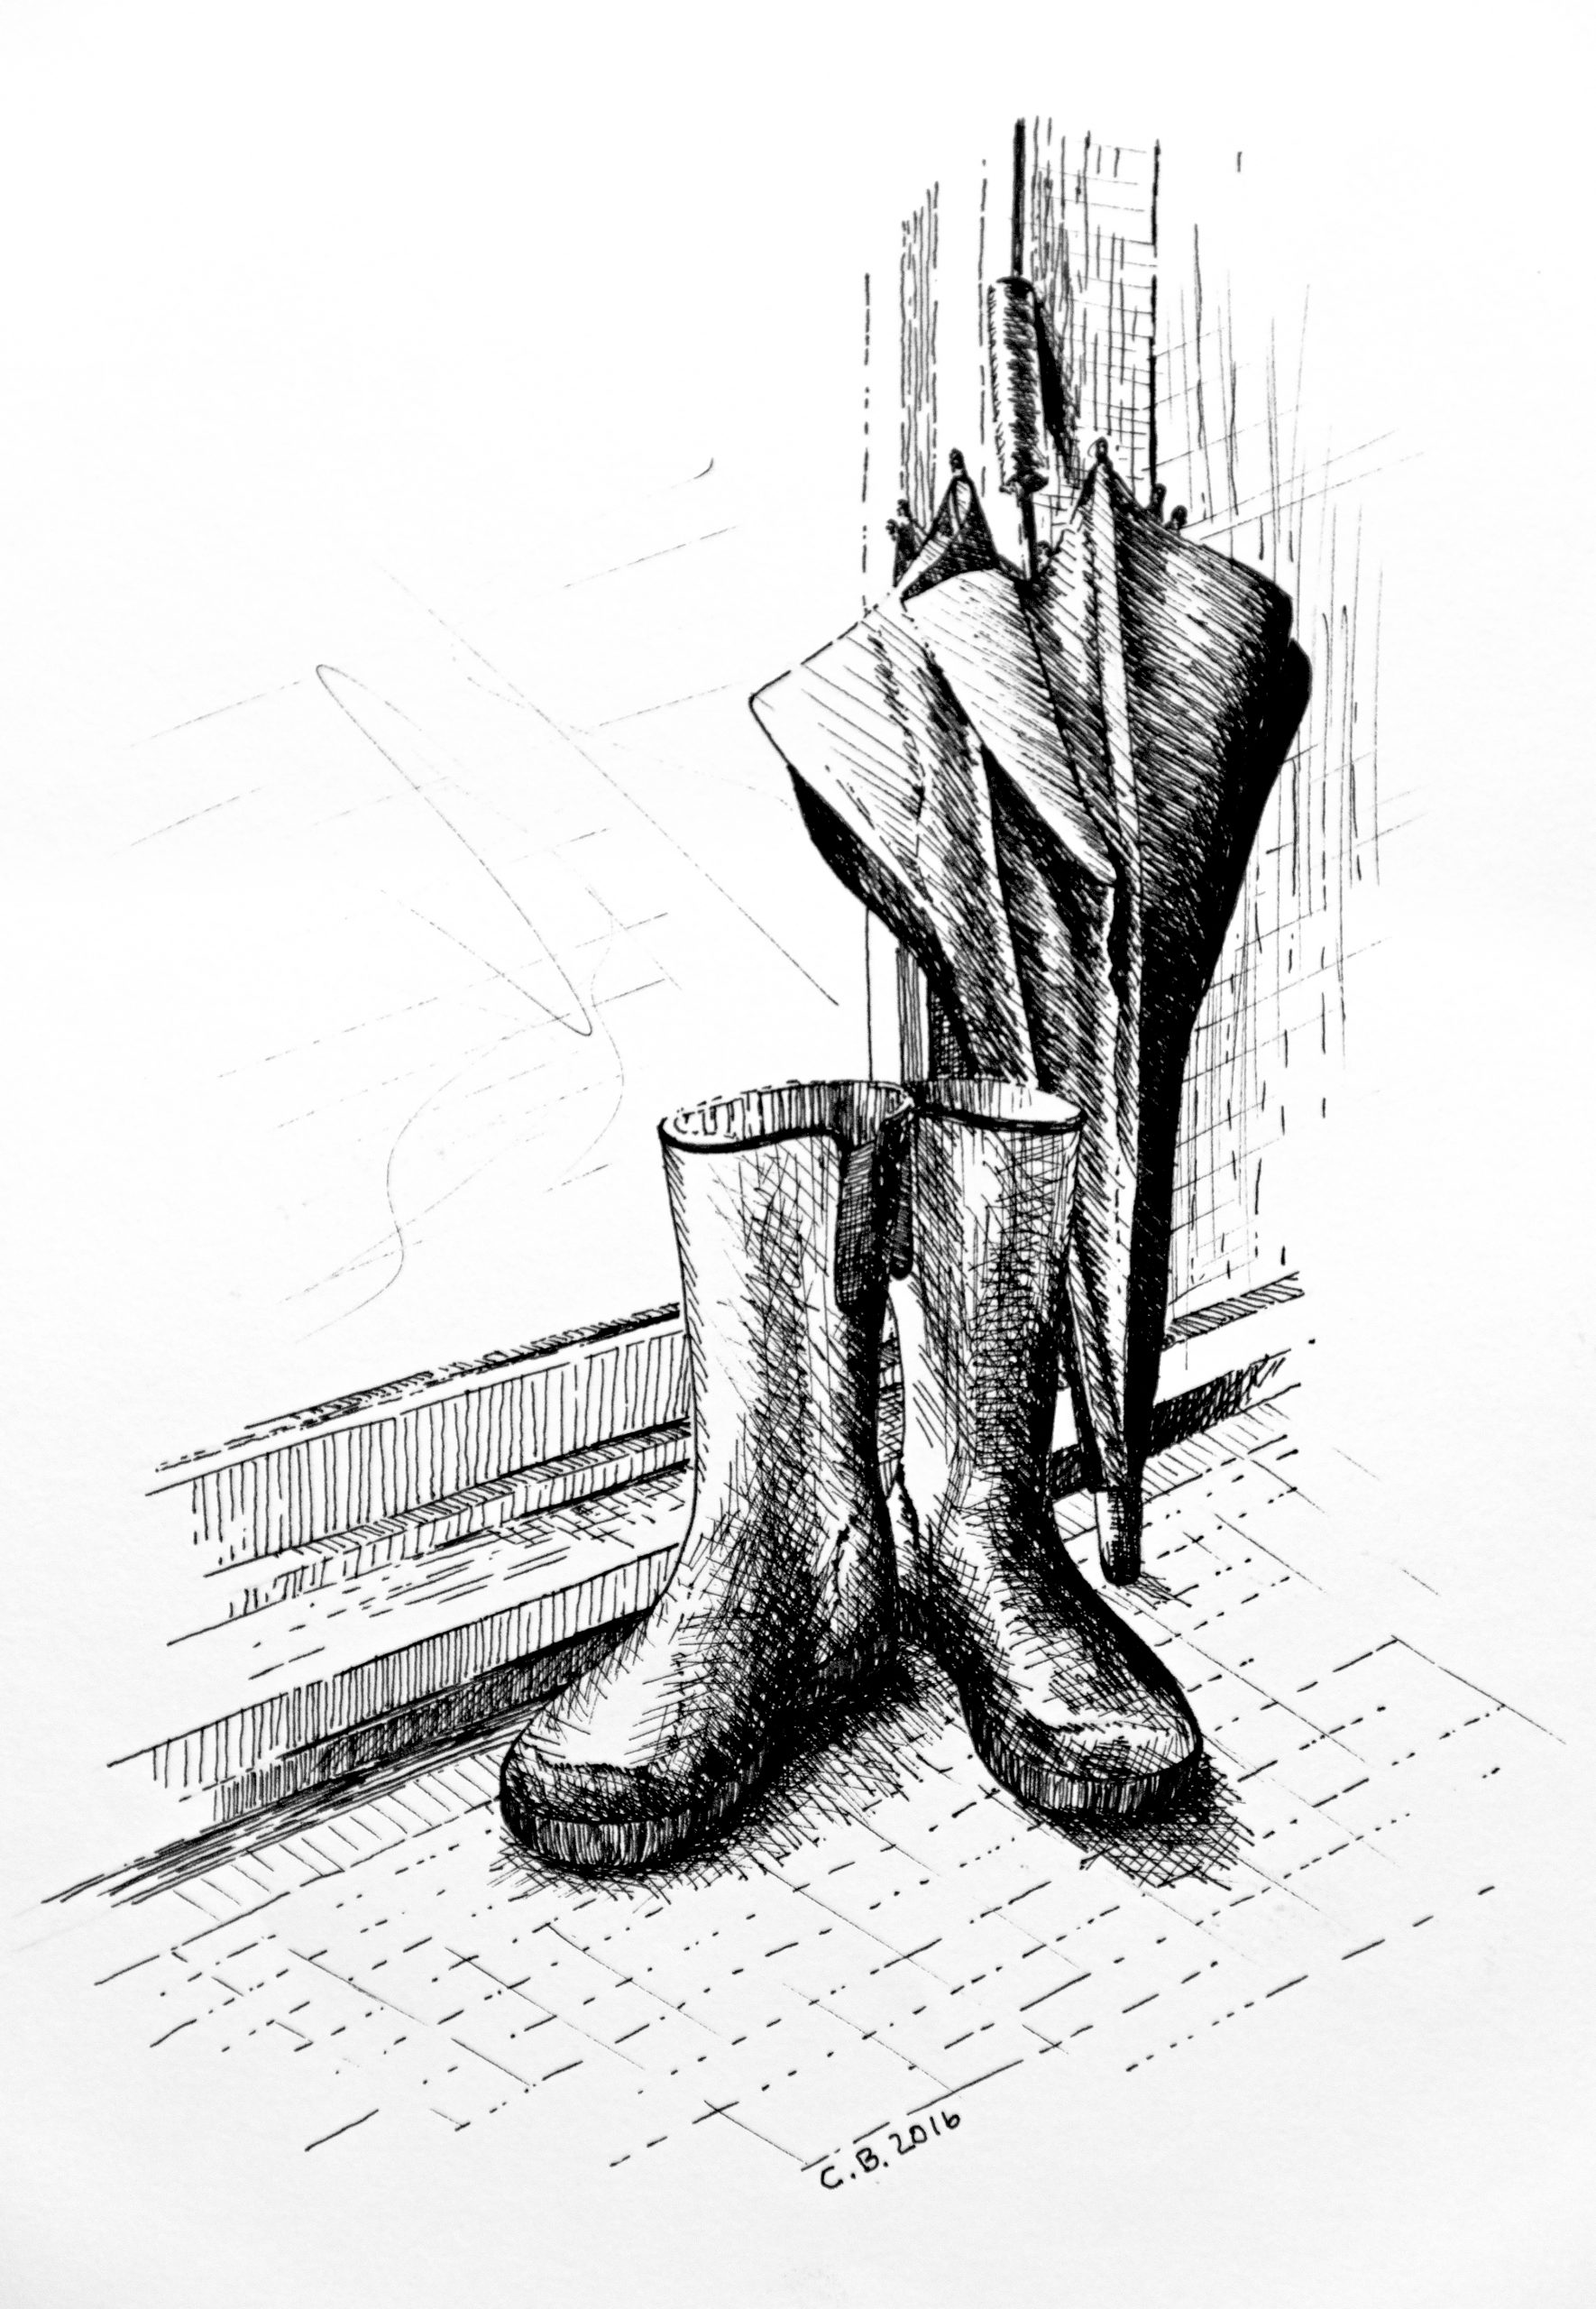 pen drawing of boots and umbrella